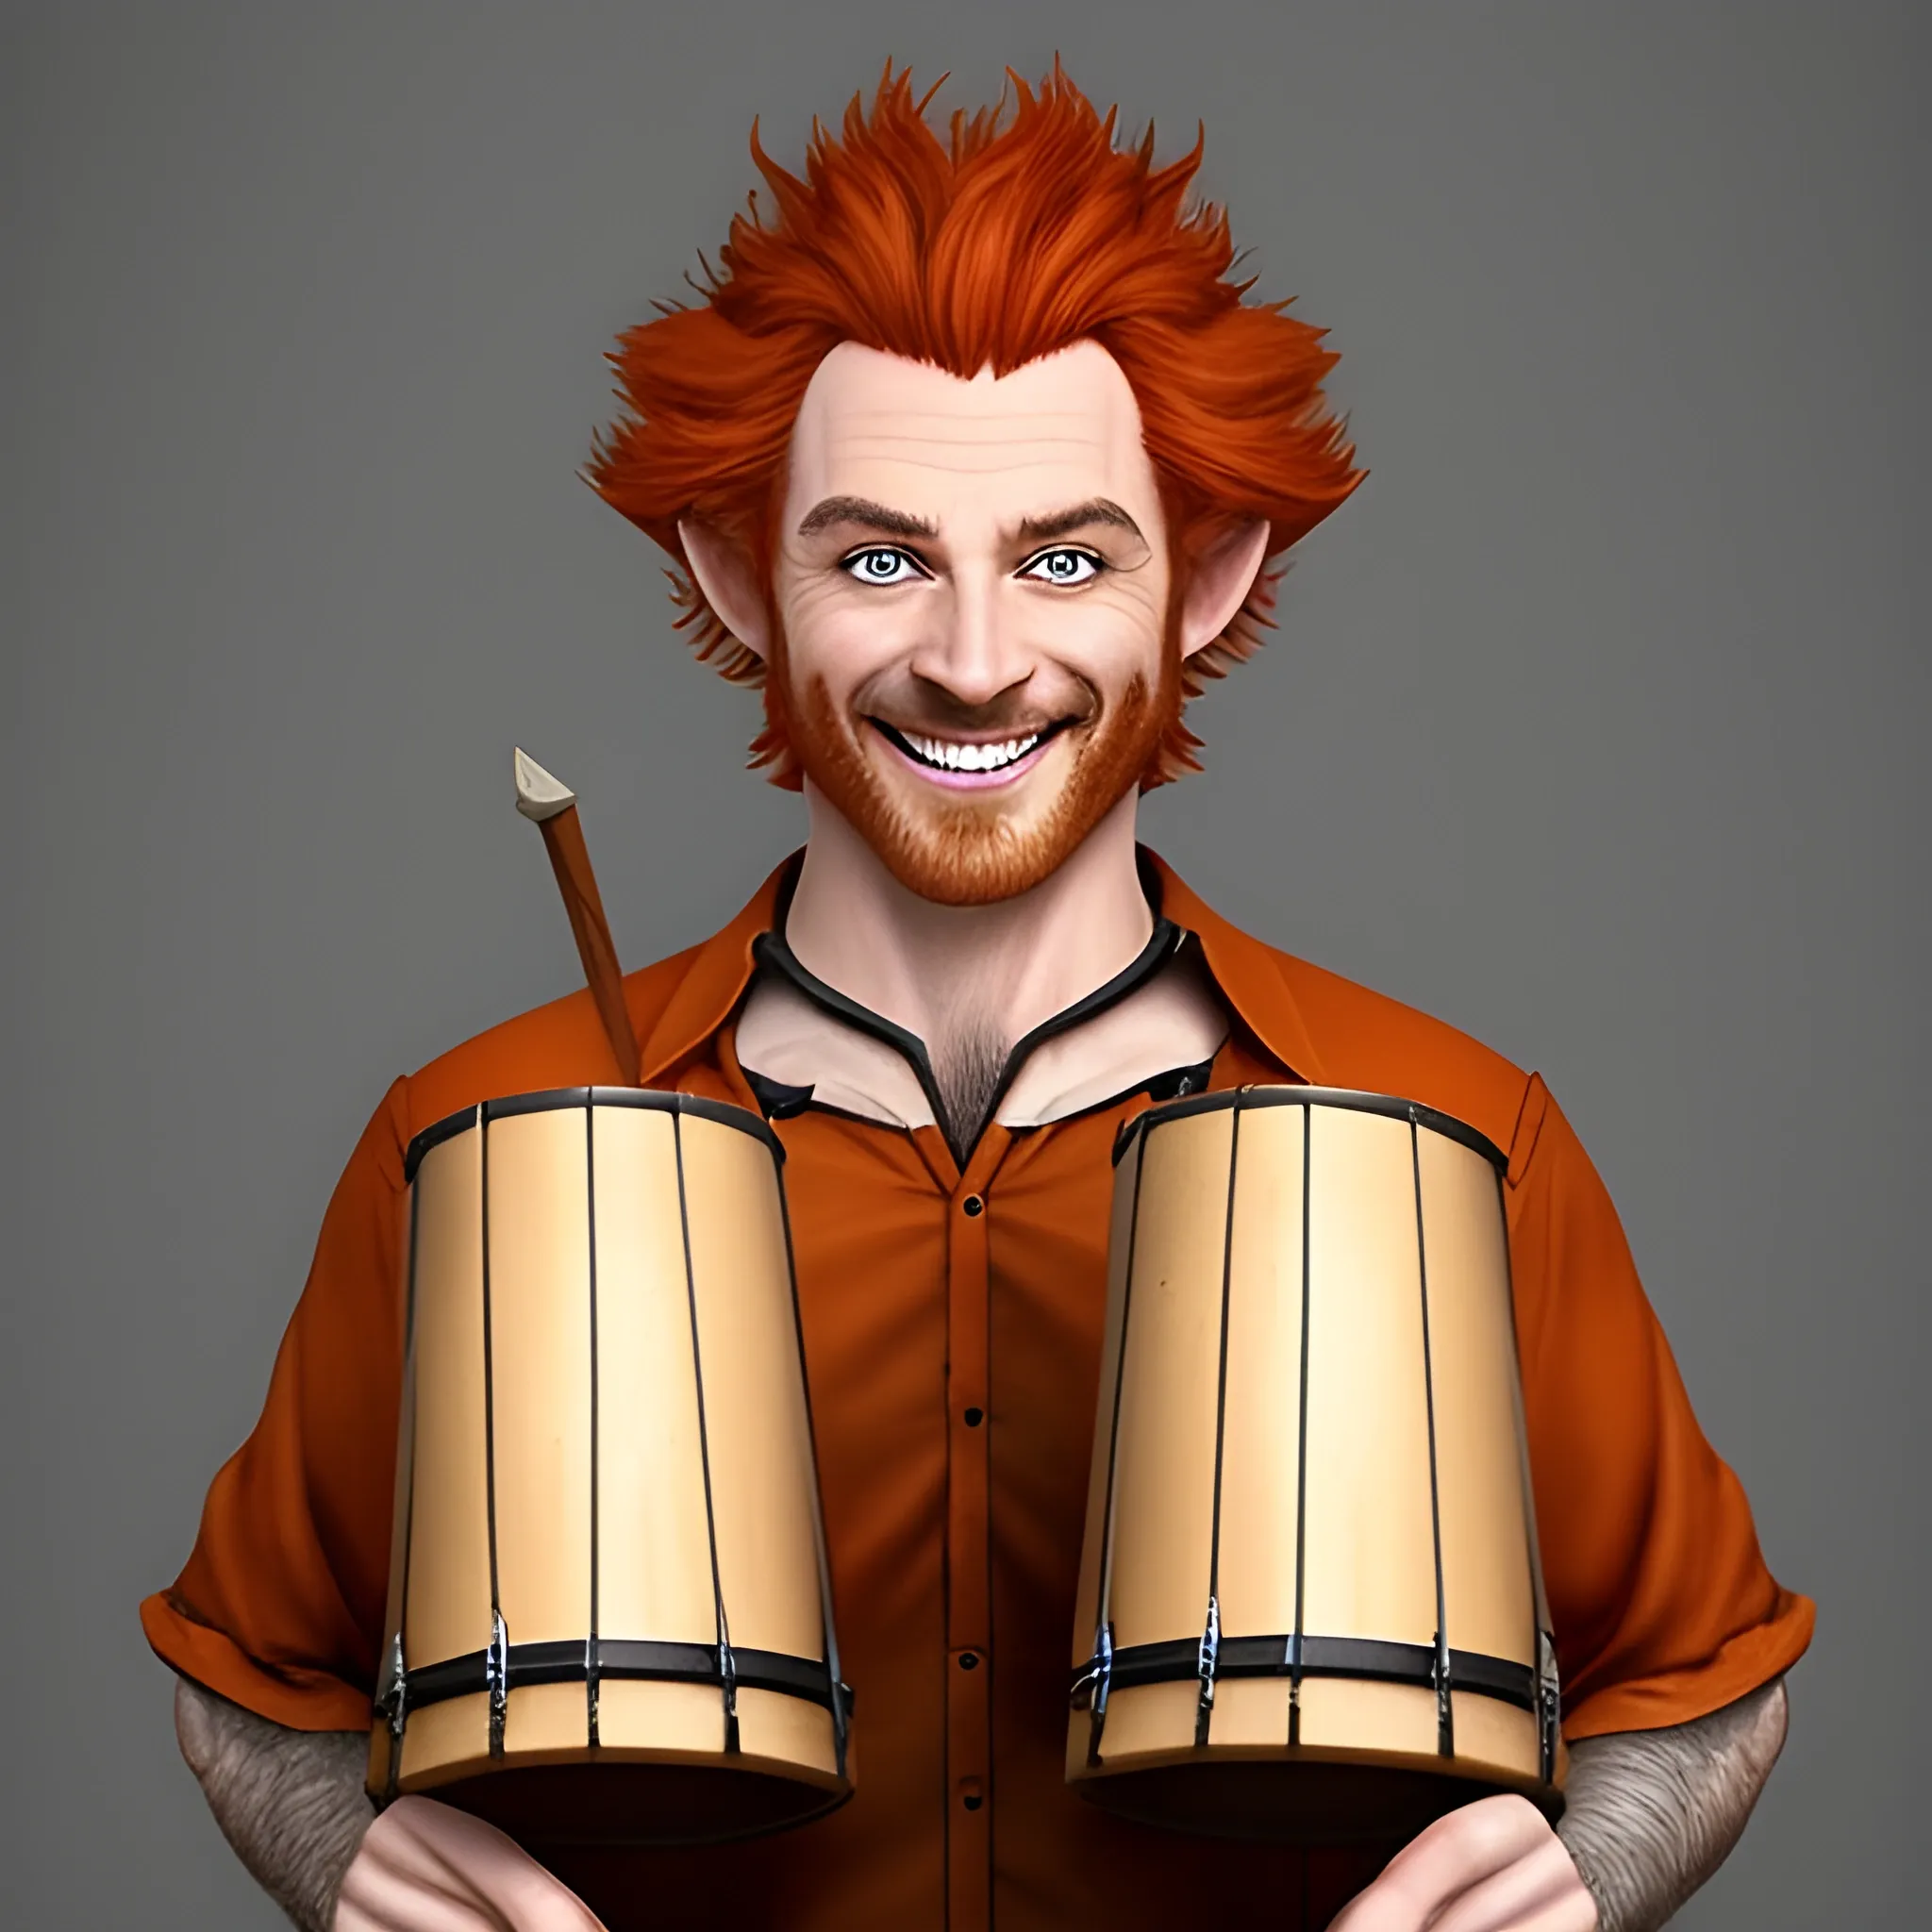 DnD  weak slim baby face halfling male short haired dark orange ginger with smiling with a mugshot expression and playing a small drum 